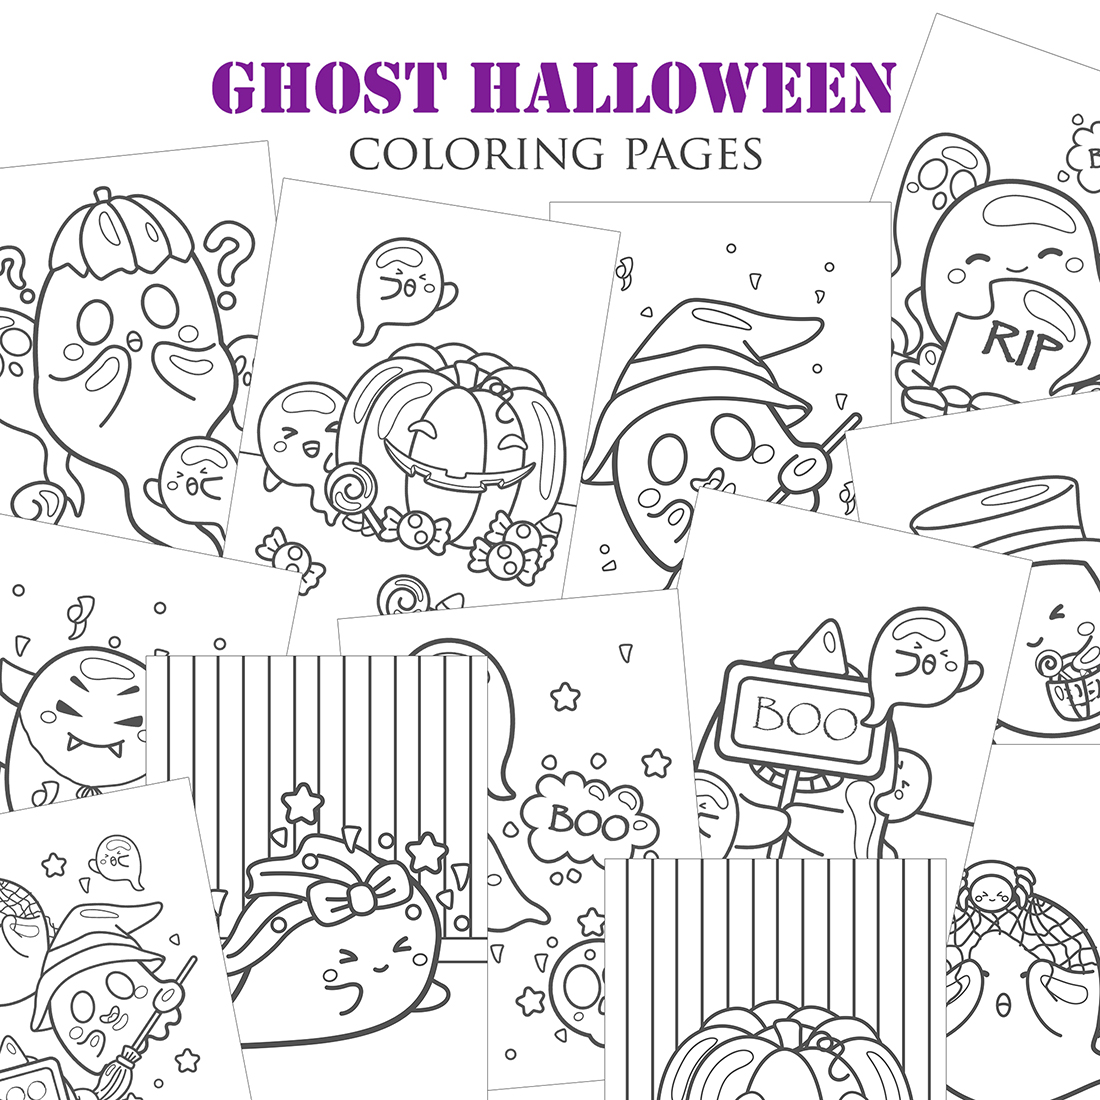 Funny and Cute Ghost Halloween Background Coloring Set Outline for Kids and Adult Activity cover image.